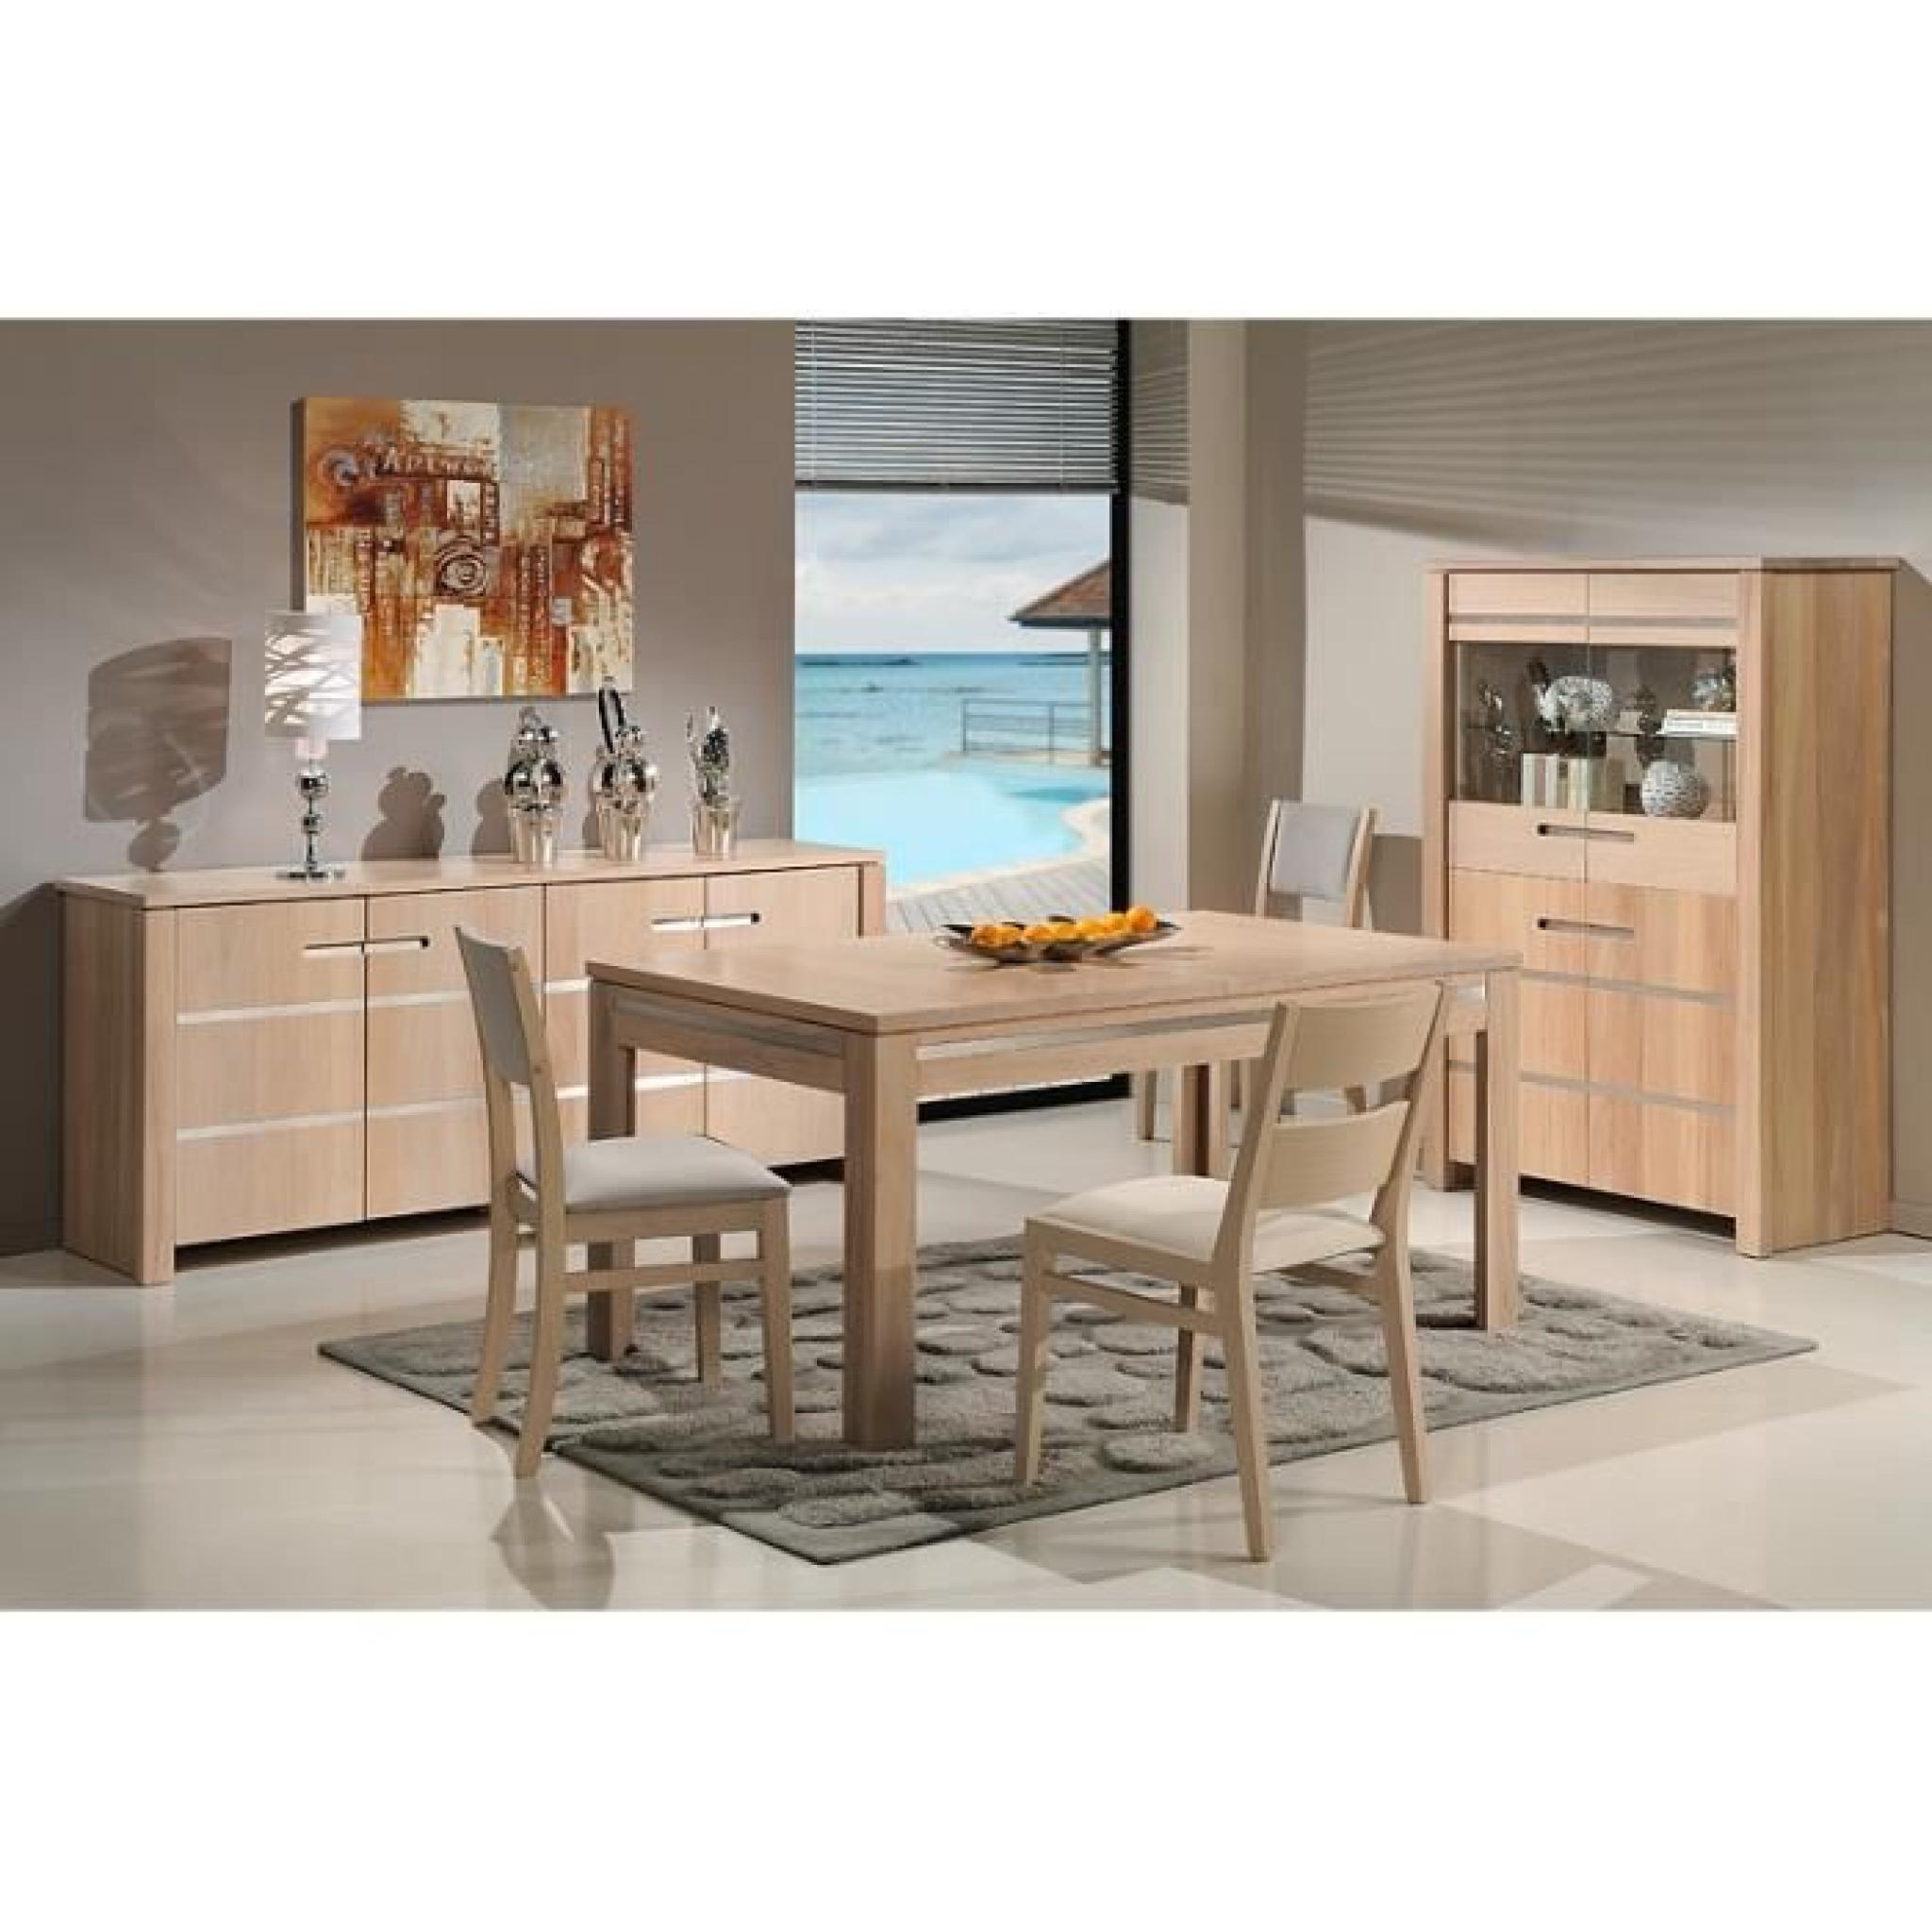 Table OPALE 180/95 ORME MASSIF-INOX (Orme - Naturel) pas cher